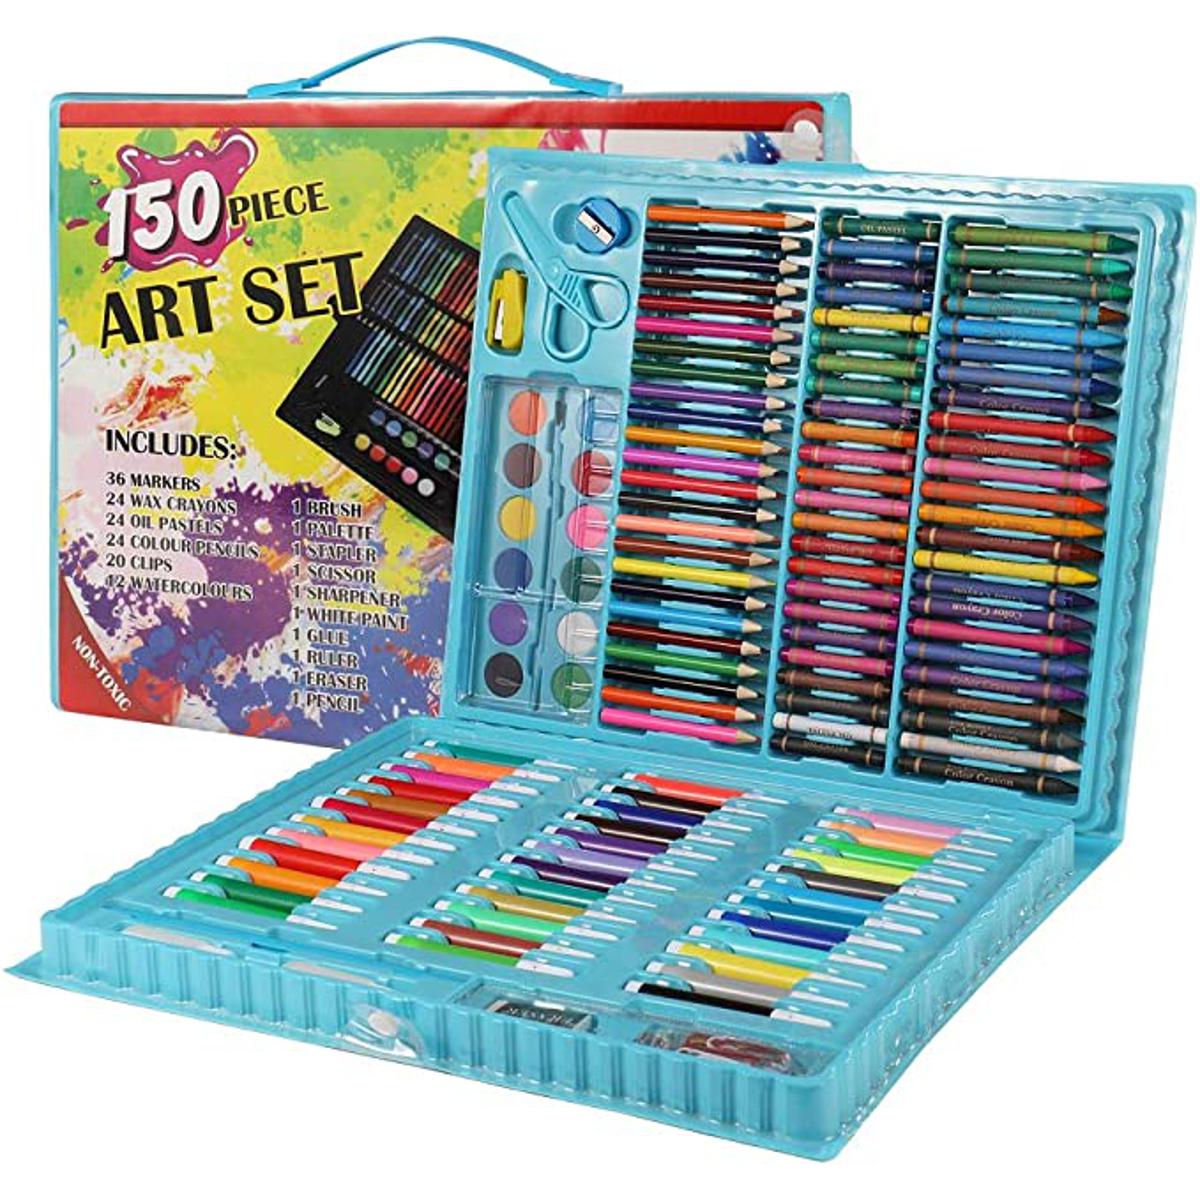 Art Supplies Girls Art Set Case - 150 pcs Art Supplies Coloring Set for  Ages 3-6 Artist Drawing Kits for Girls Boys School Projects | Art Painting